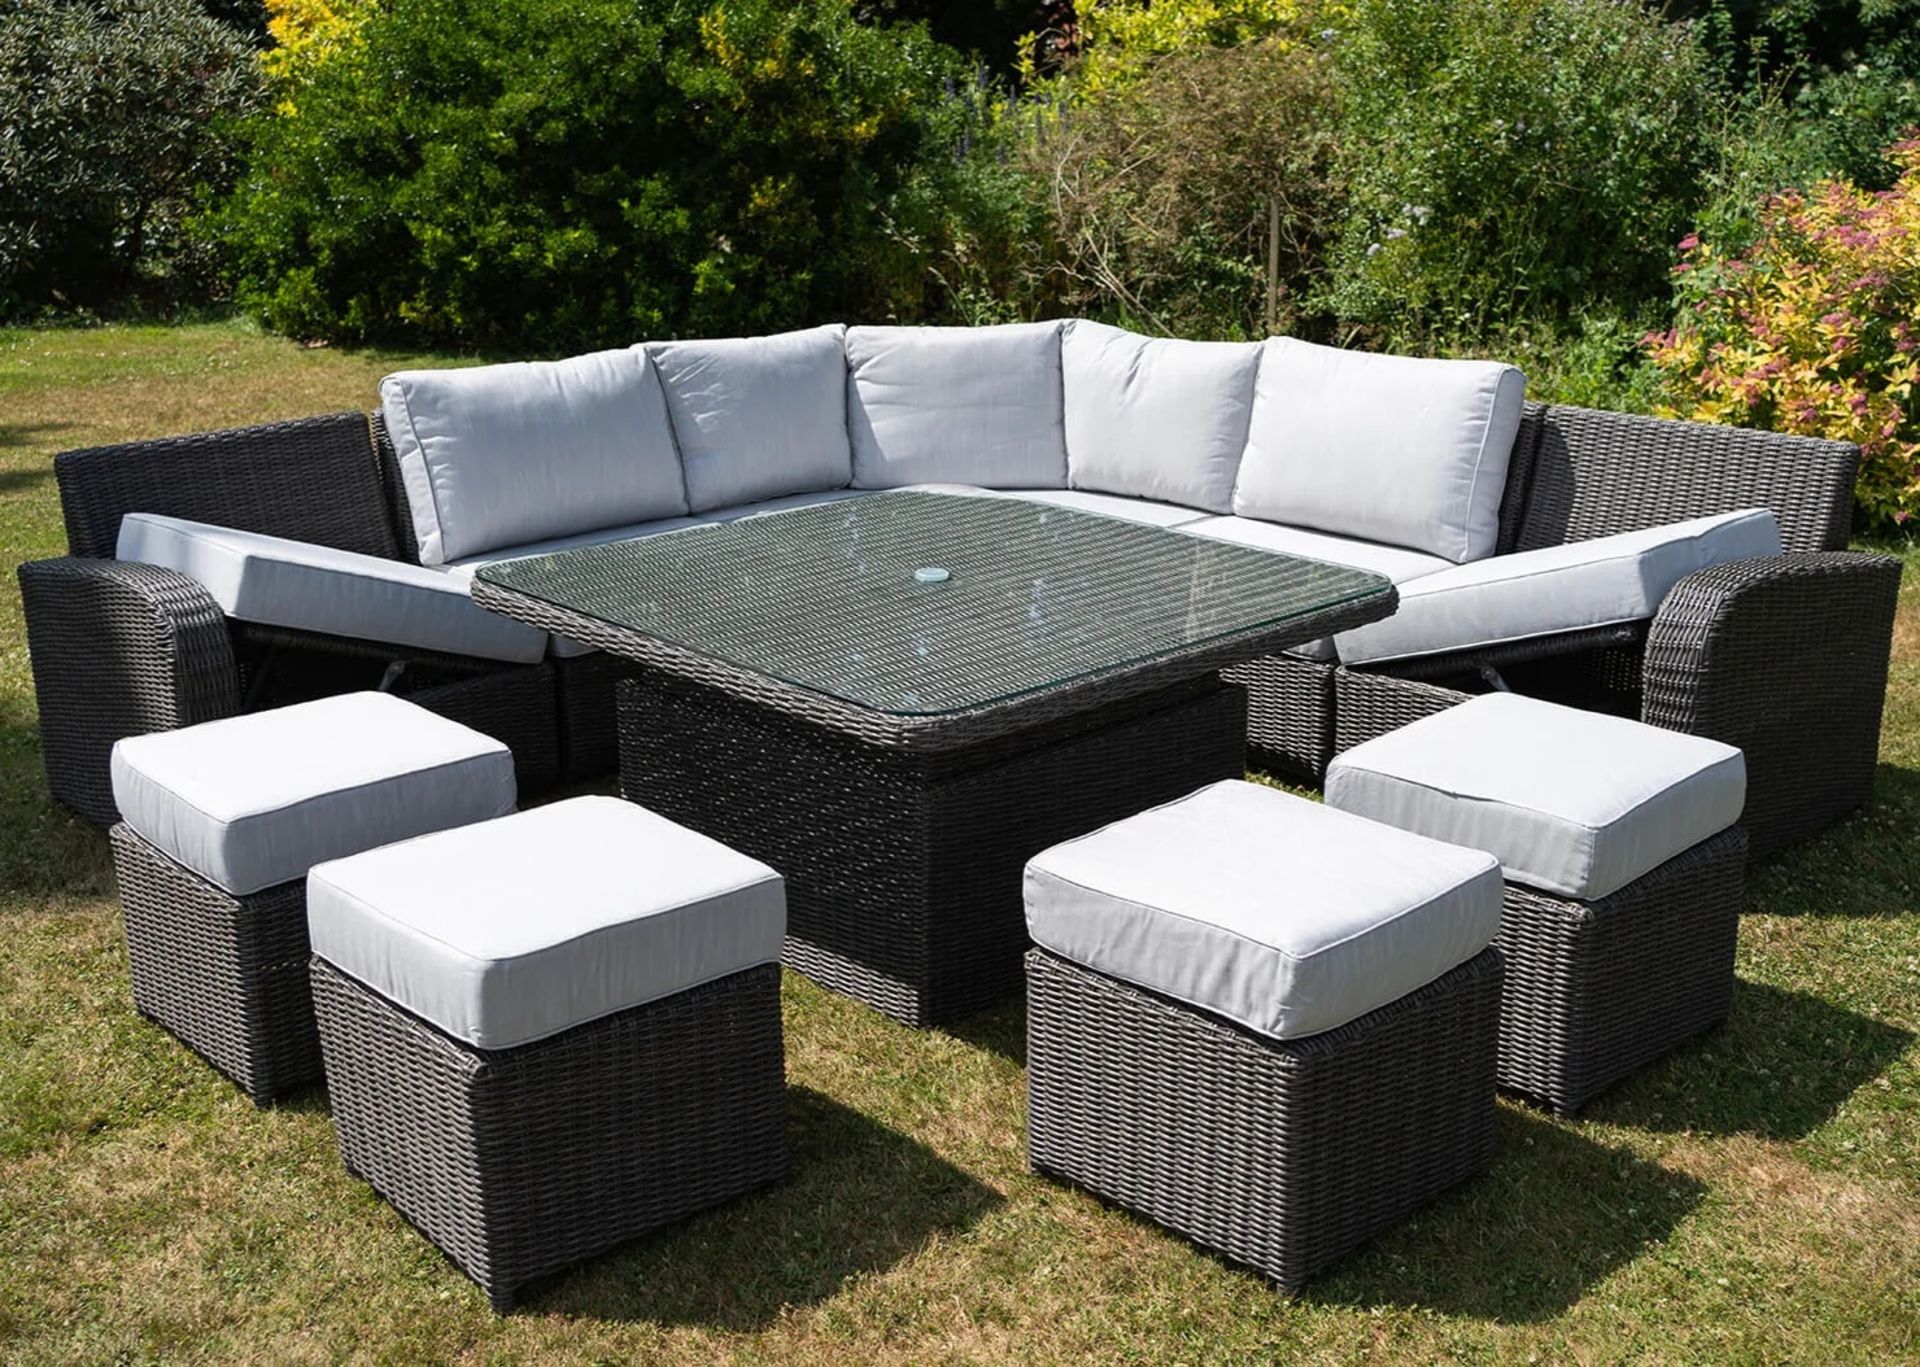 Brand New Moda Furniture, 10 Seater Outdoor Rise and Fall Table Dining Set in Natural with Cream - Image 2 of 8